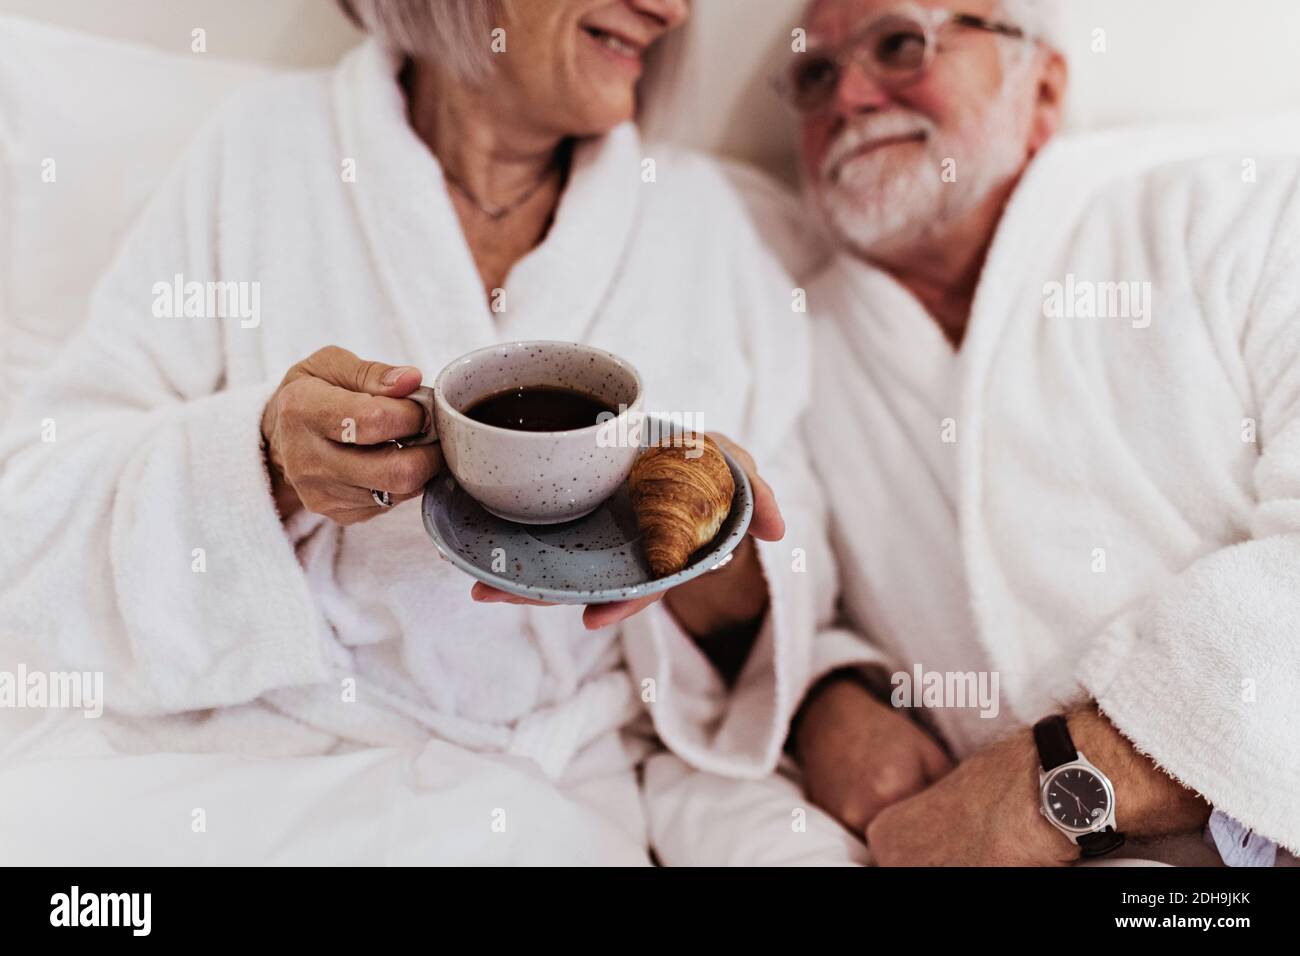 A Woman Sits On The Bed Beside A Face-down Man Coffee Mug by